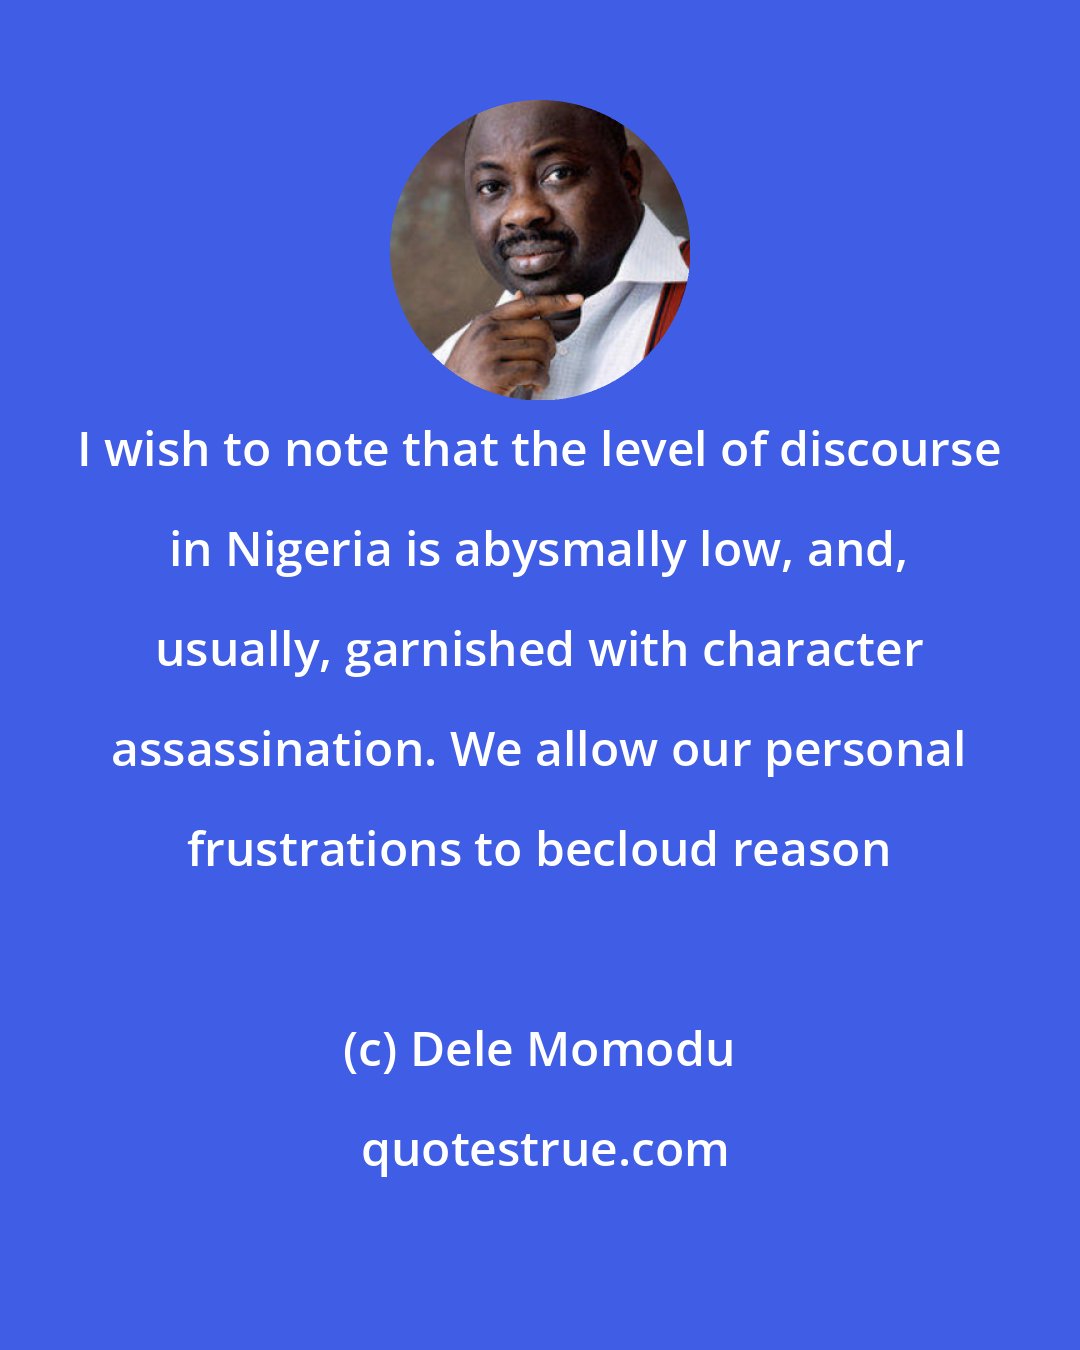 Dele Momodu: I wish to note that the level of discourse in Nigeria is abysmally low, and, usually, garnished with character assassination. We allow our personal frustrations to becloud reason